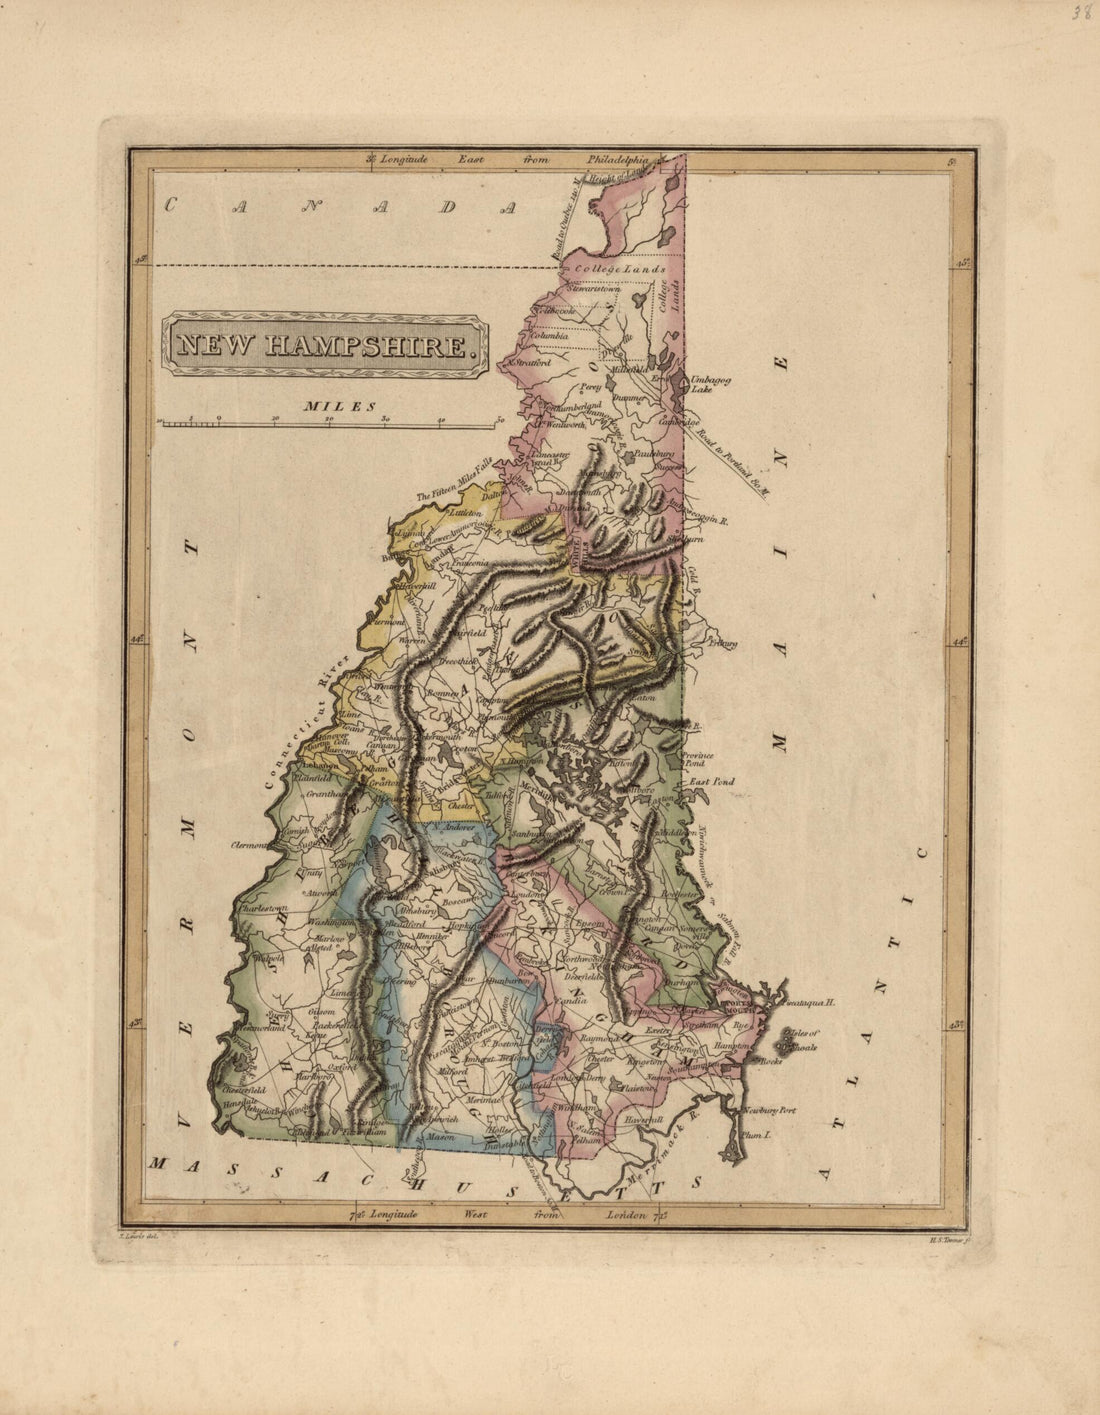 This old map of New Hampshire from a New and Elegant General Atlas, Containing Maps of Each of the United States. from 1817 was created by Henry Schenck Tanner in 1817